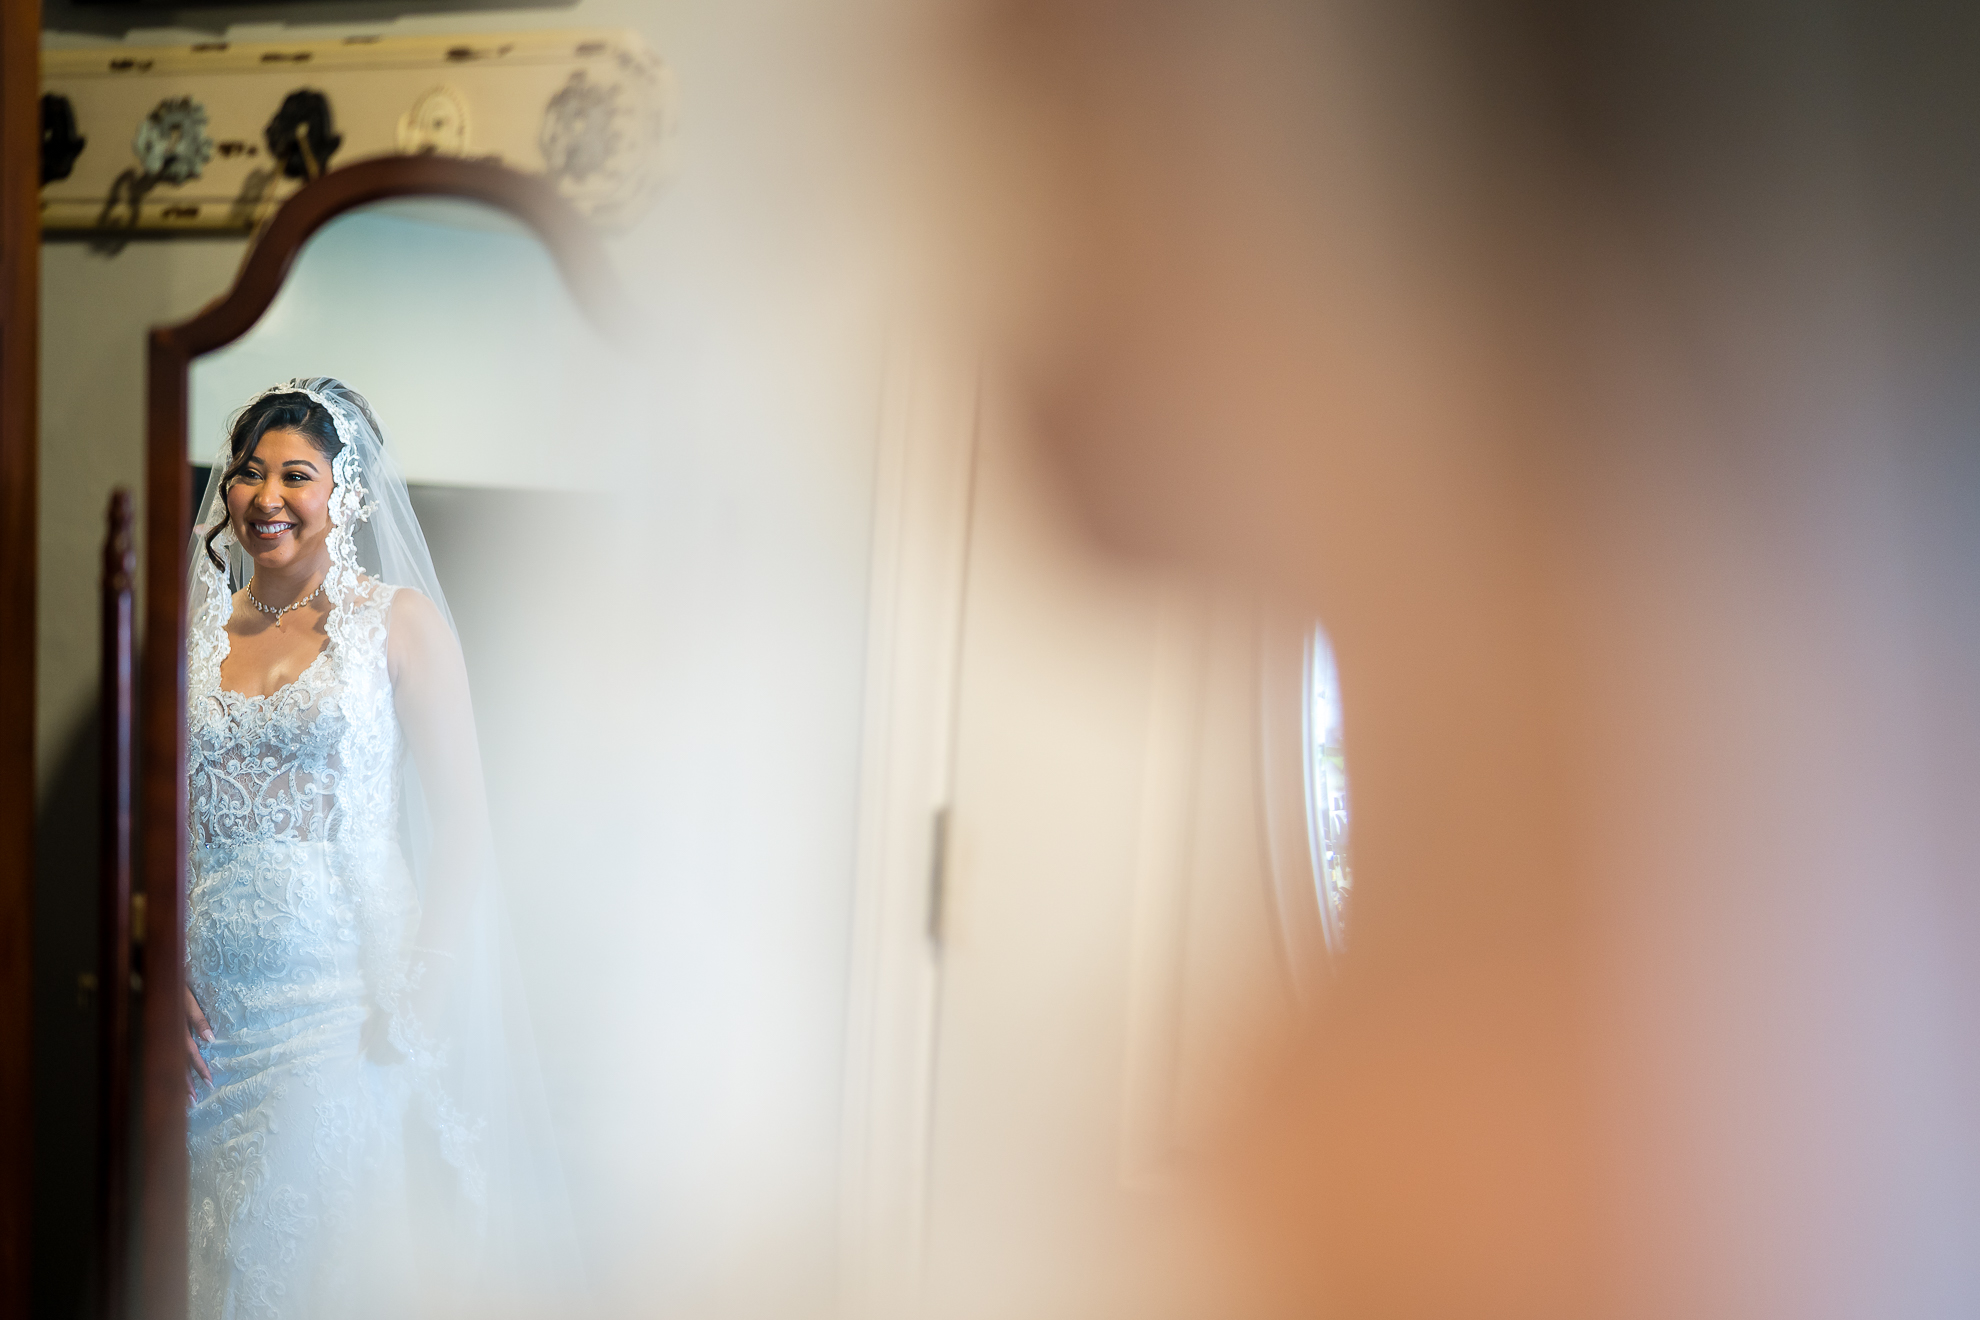 ThomasKim_photography A bride in a wedding dress admiring herself in front of a mirror.